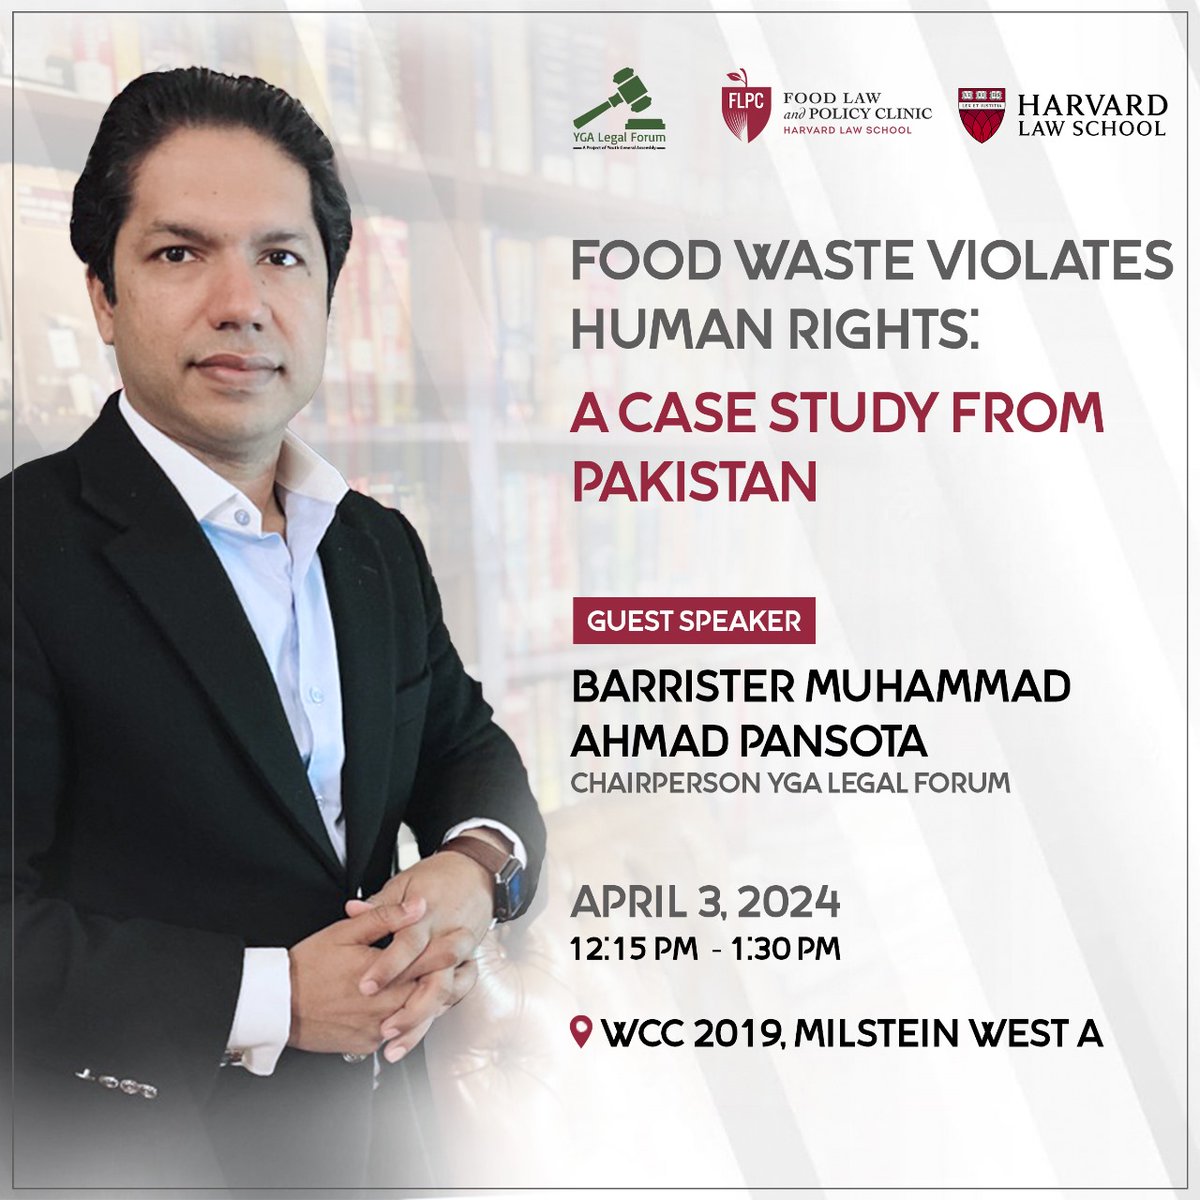 Join us for a panel discussion organized by the Food Law & Policy Clinic of Harvard Law School on the critical topic: 'Food Waste Violates Human Rights: A Case Study from Pakistan.' Barrister Muhammad Ahmad Pansota, Chairperson of YGA Legal Forum, will share insights from the…